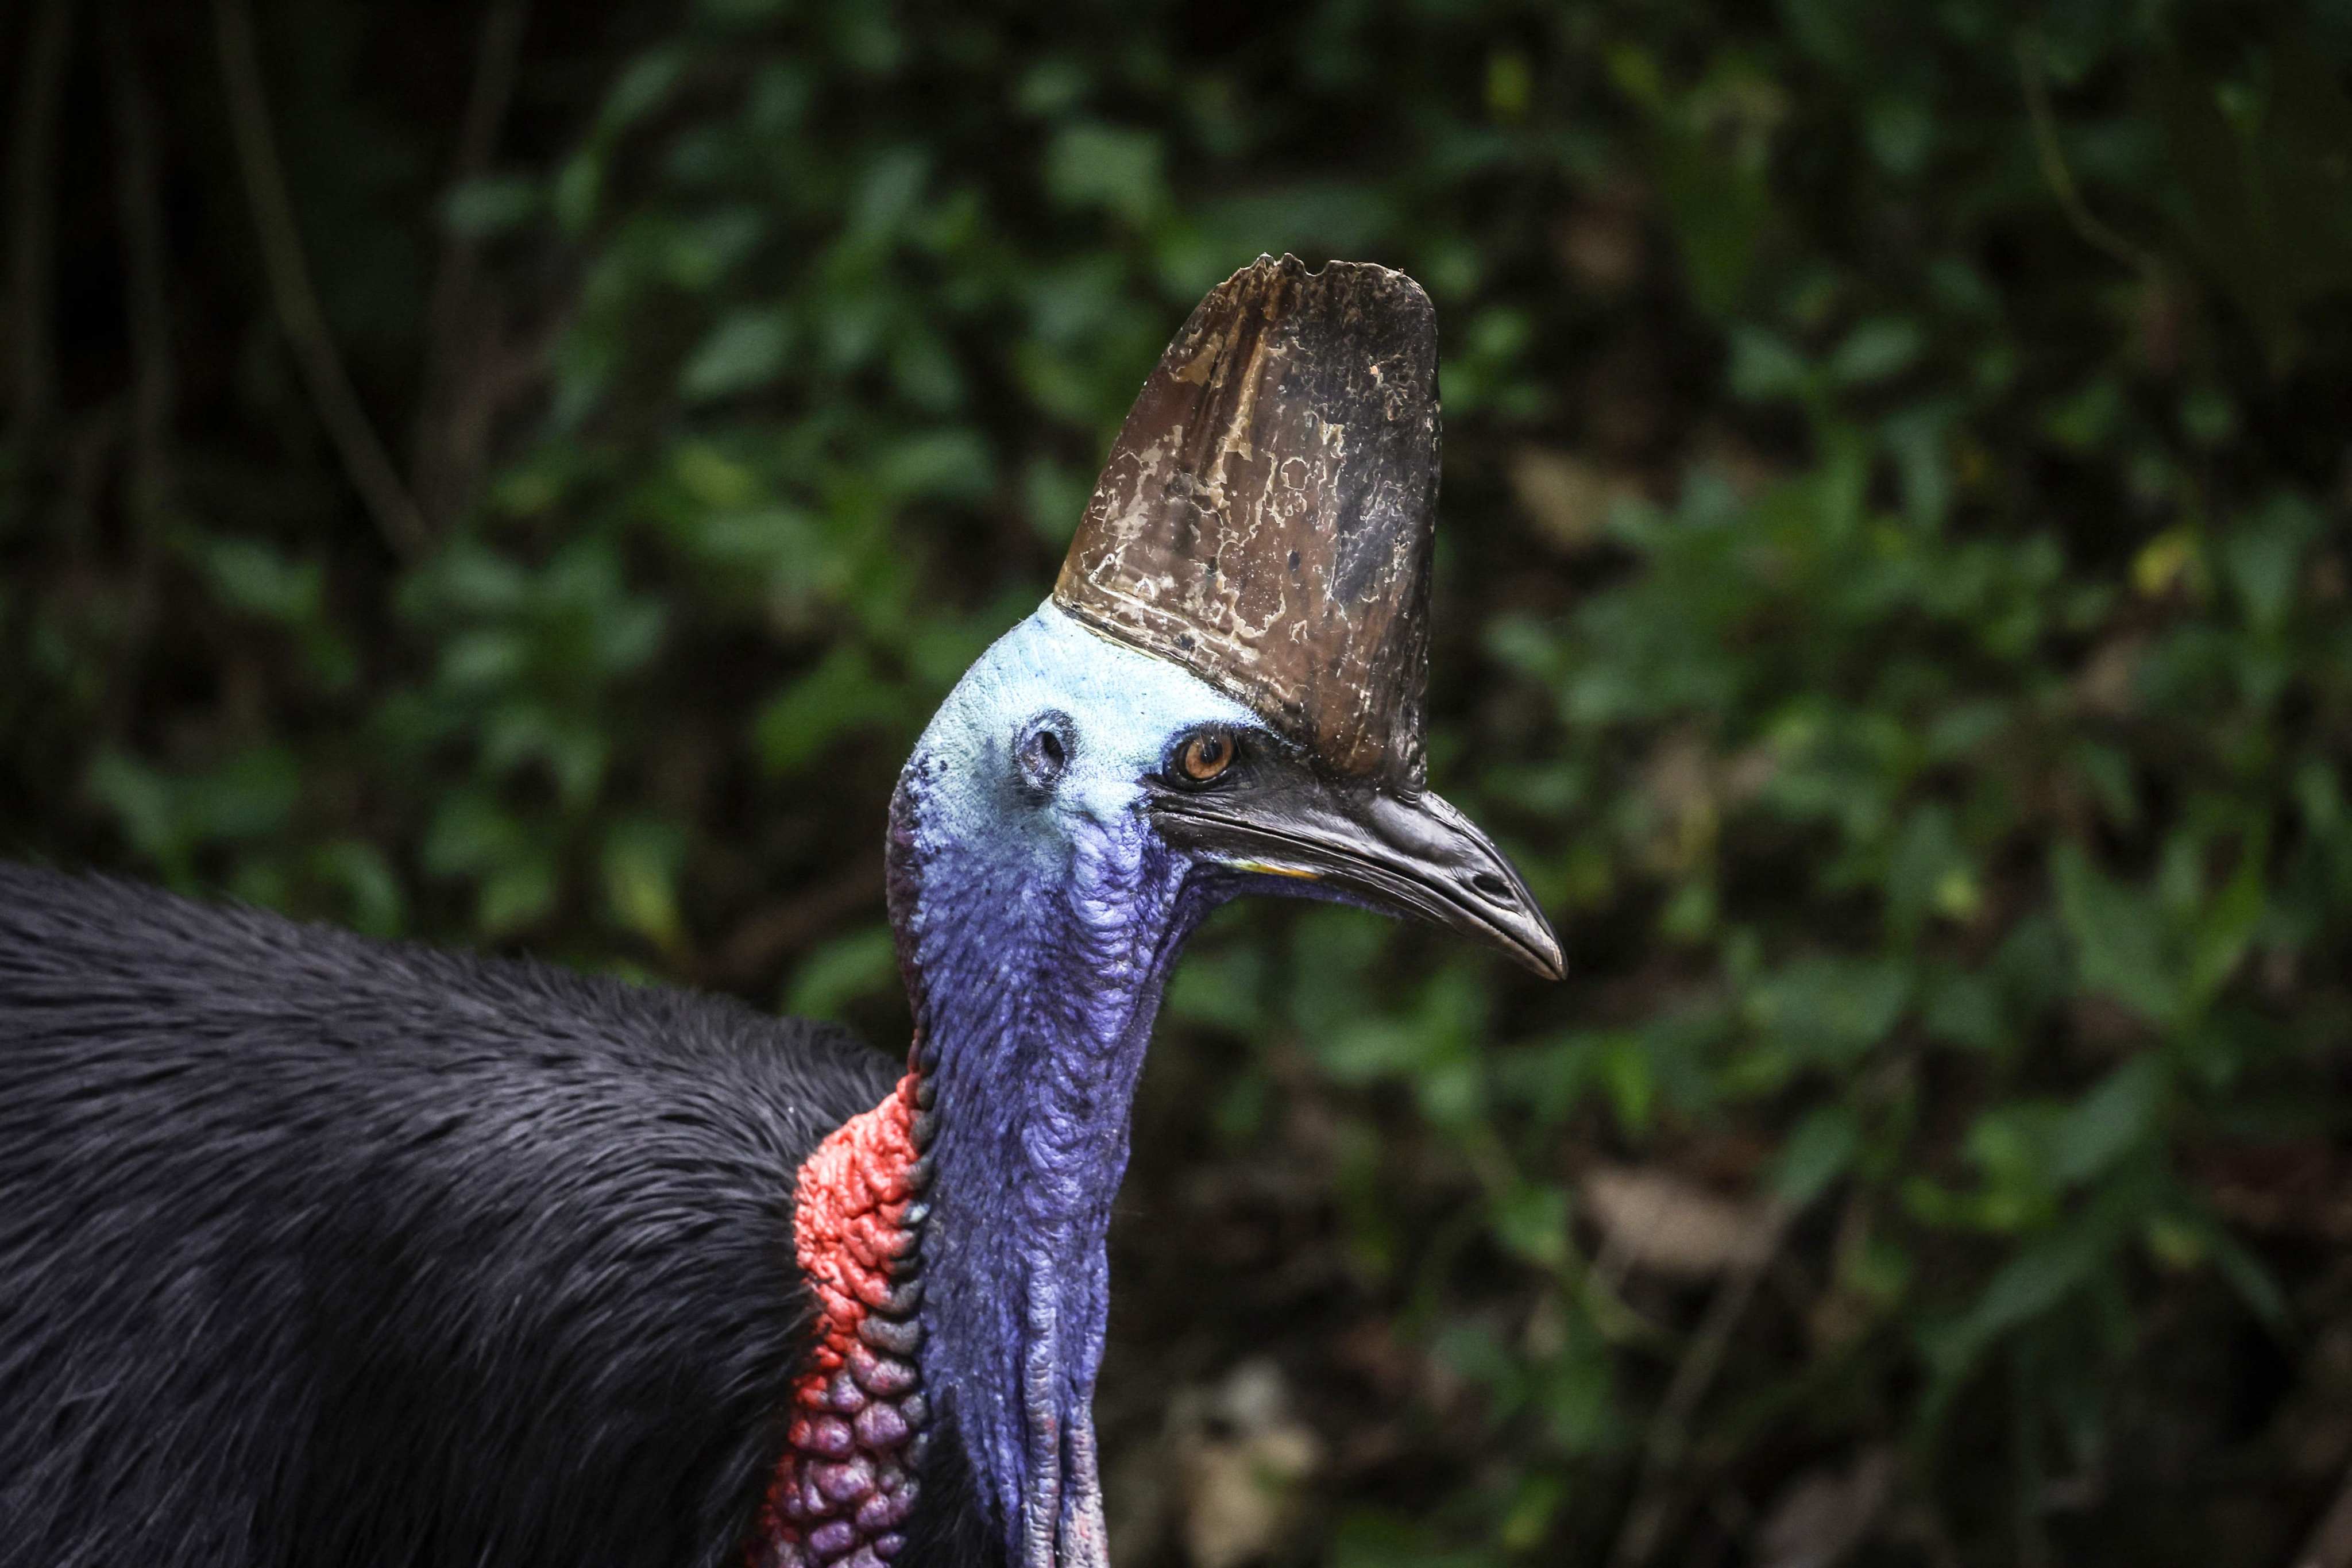 Only about 4,500 cassowary birds remain in the wild. Photo: AFP